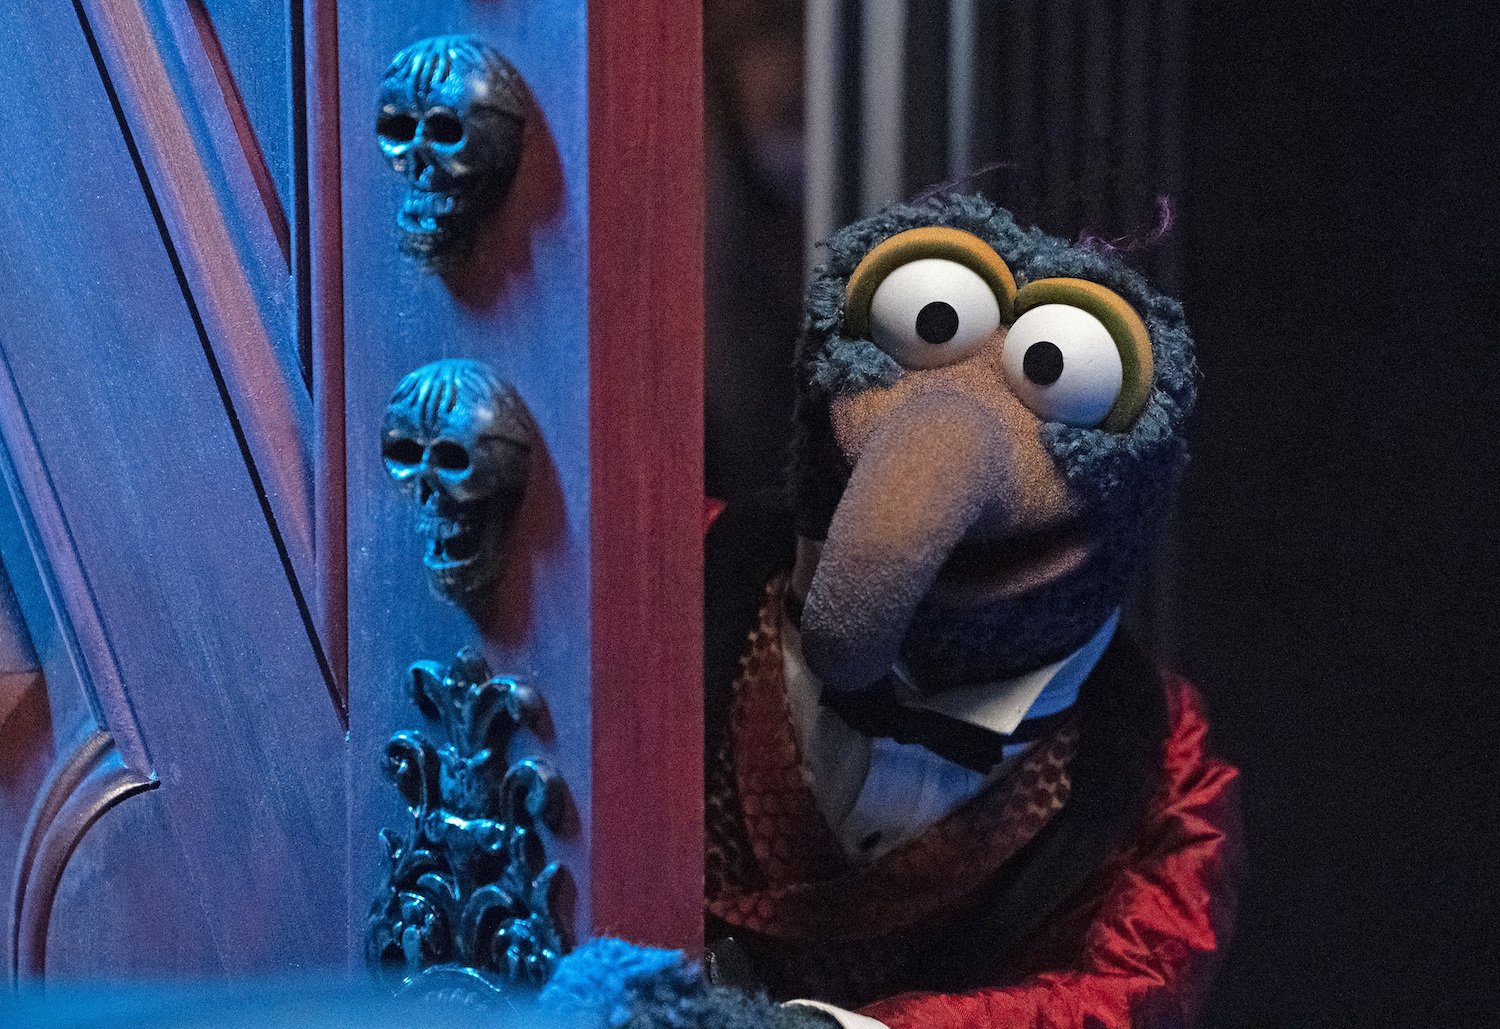 Gonzo peeks around a door in Muppets Haunted Mansion, which is one of Ed Asner's final movies after the Up movie.